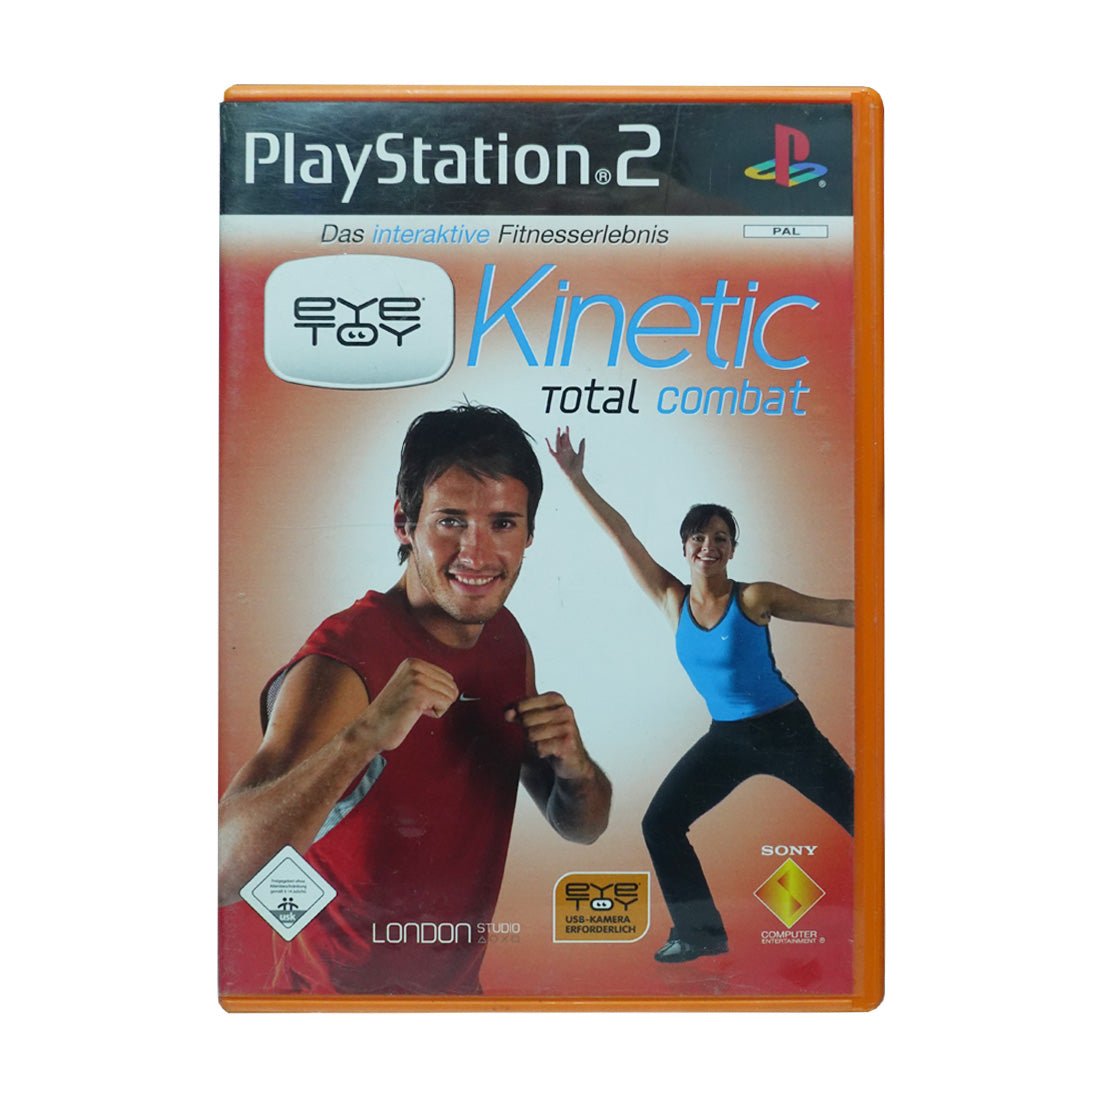 (Pre-Owned) EyeToy: Kinetic Total Combat - PlayStation 2 - ريترو - Store 974 | ستور ٩٧٤